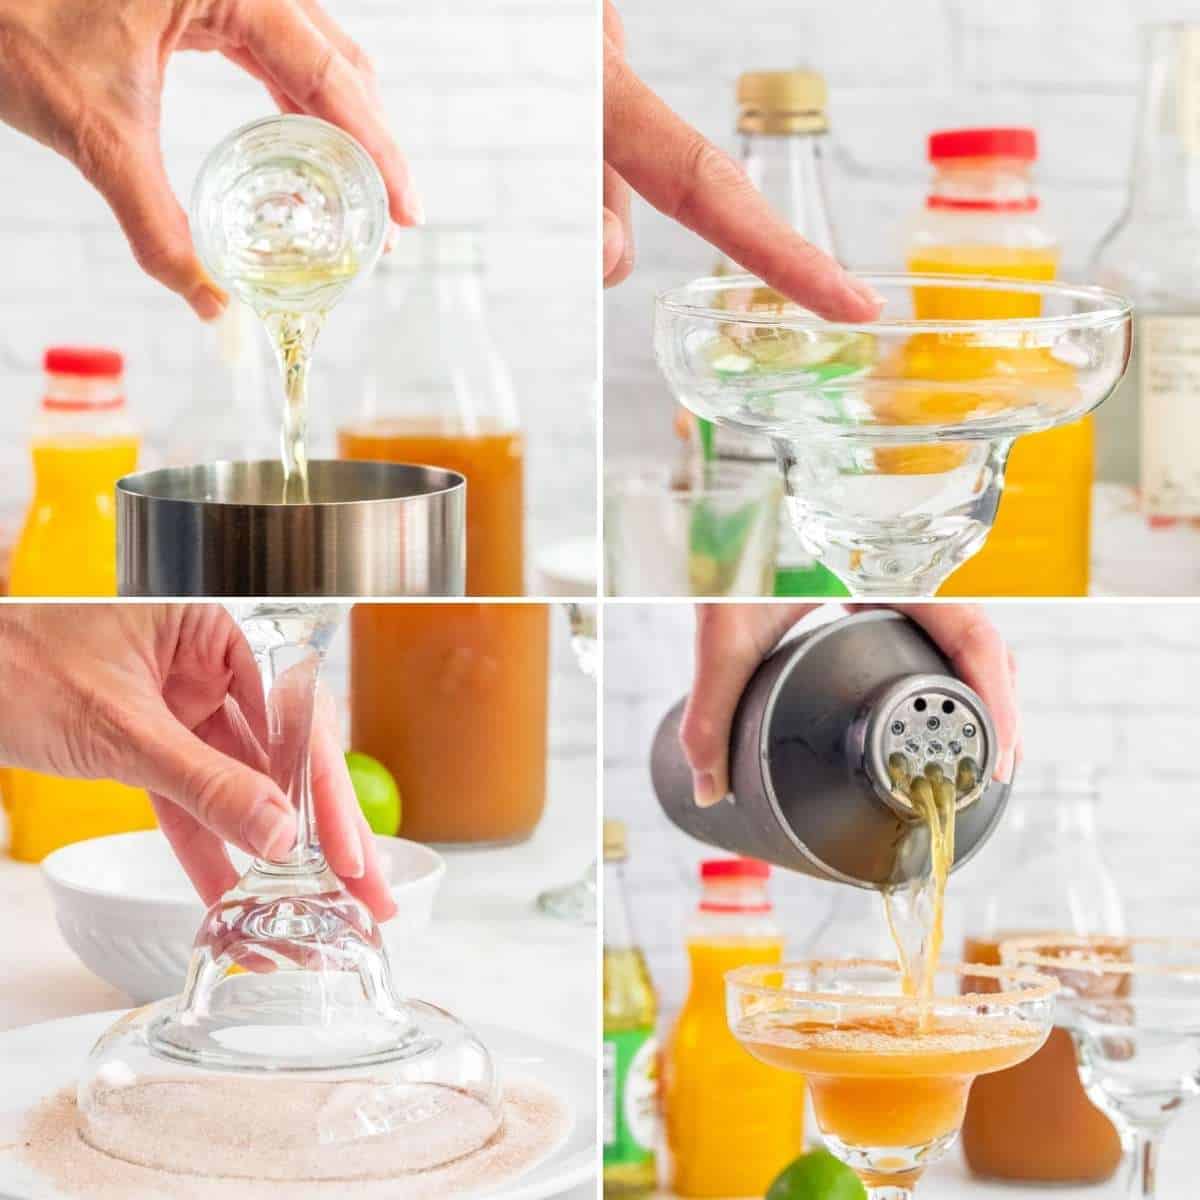 a collage of images showing how to coat the rim of a margarita glass with cinnamon sugar